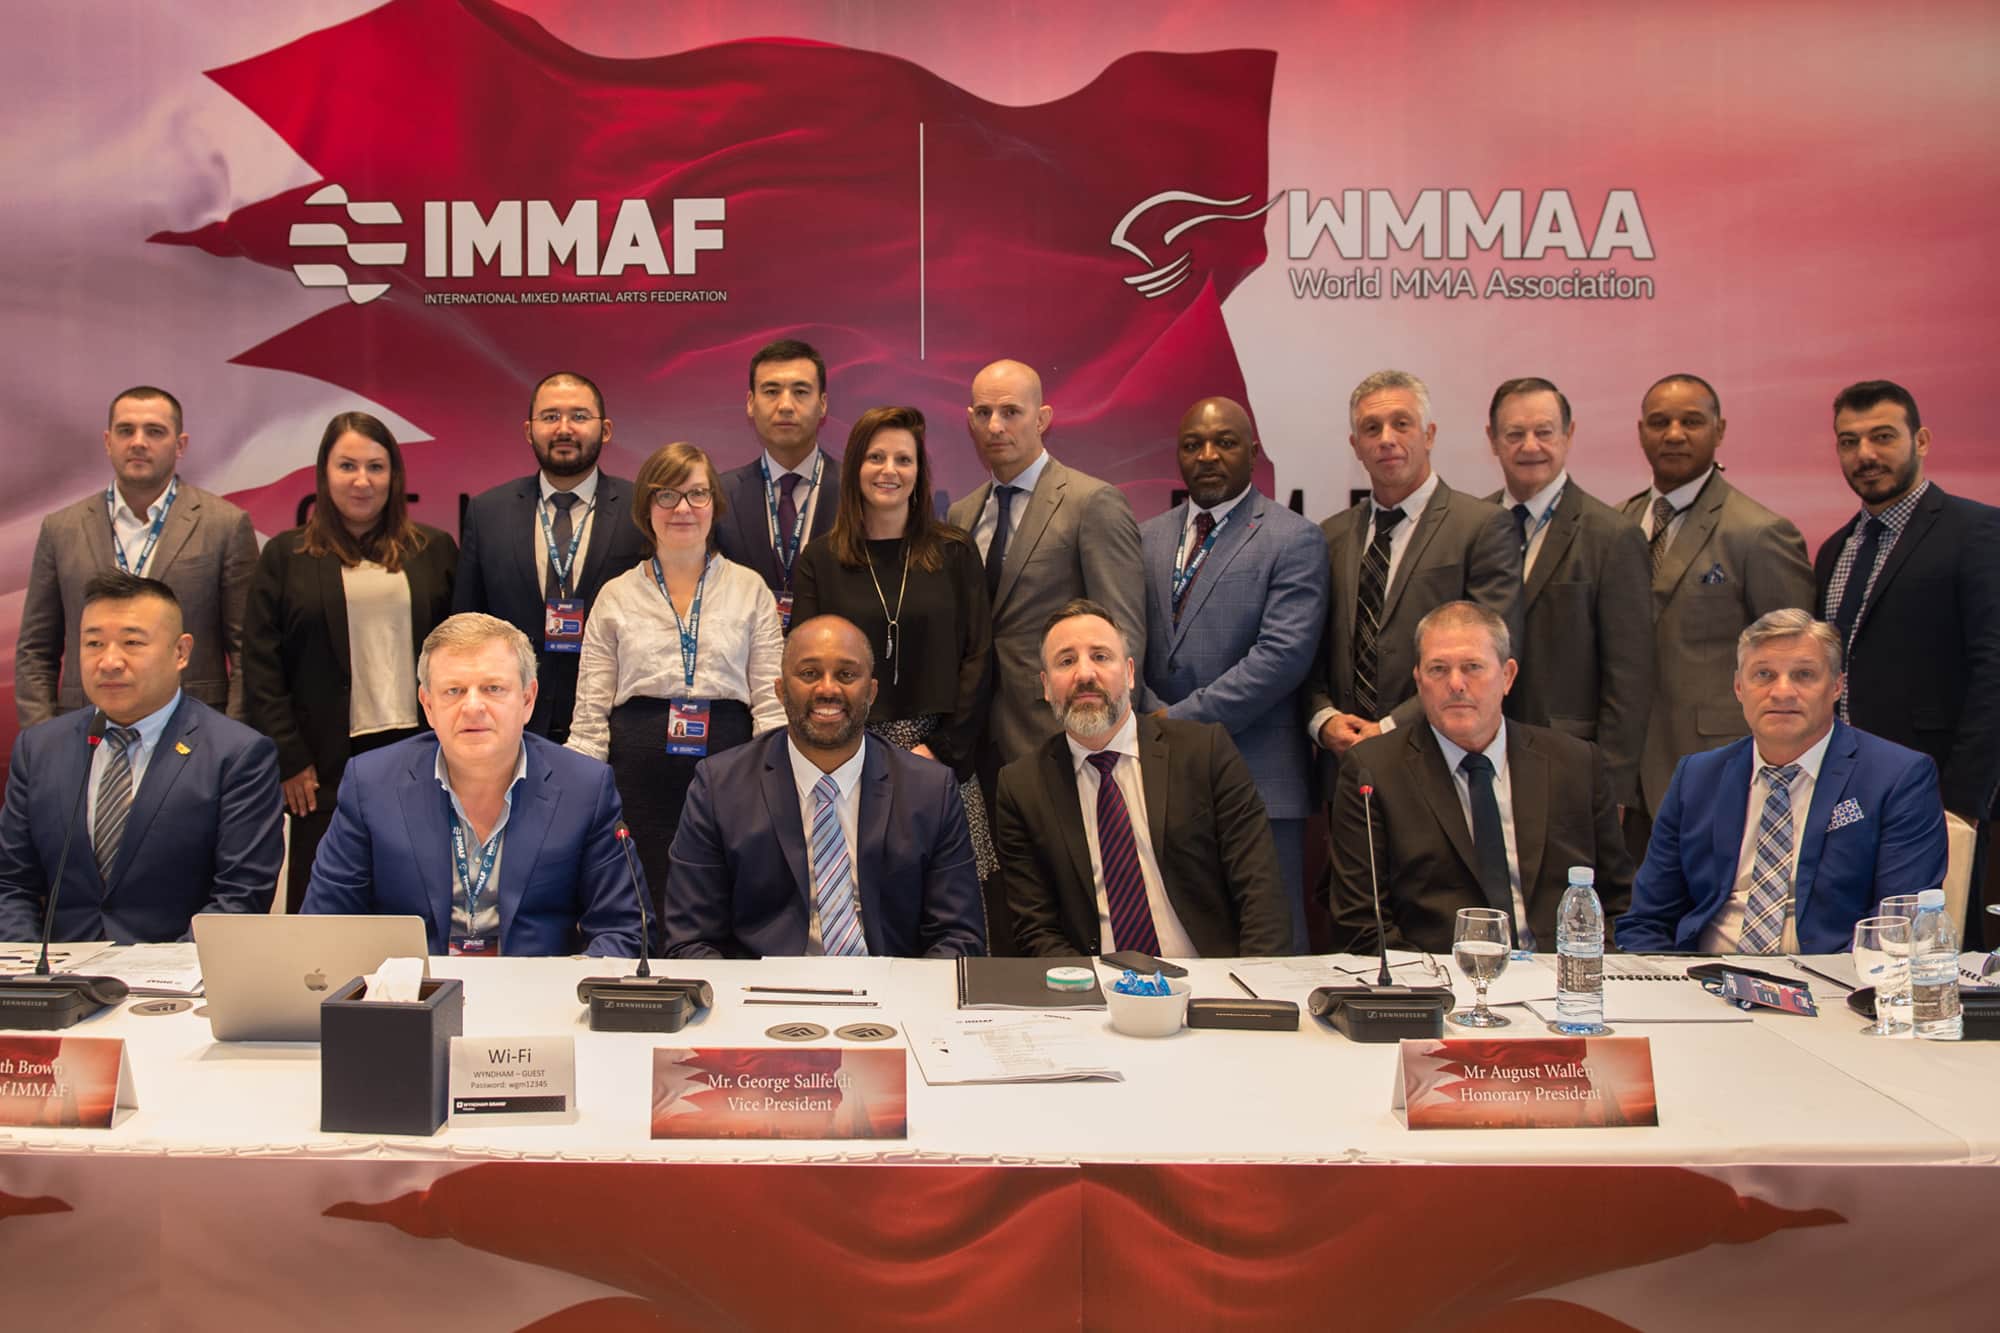 The tale of IMMAF & WMMAA: How two global MMA federations merged to create a super organisation